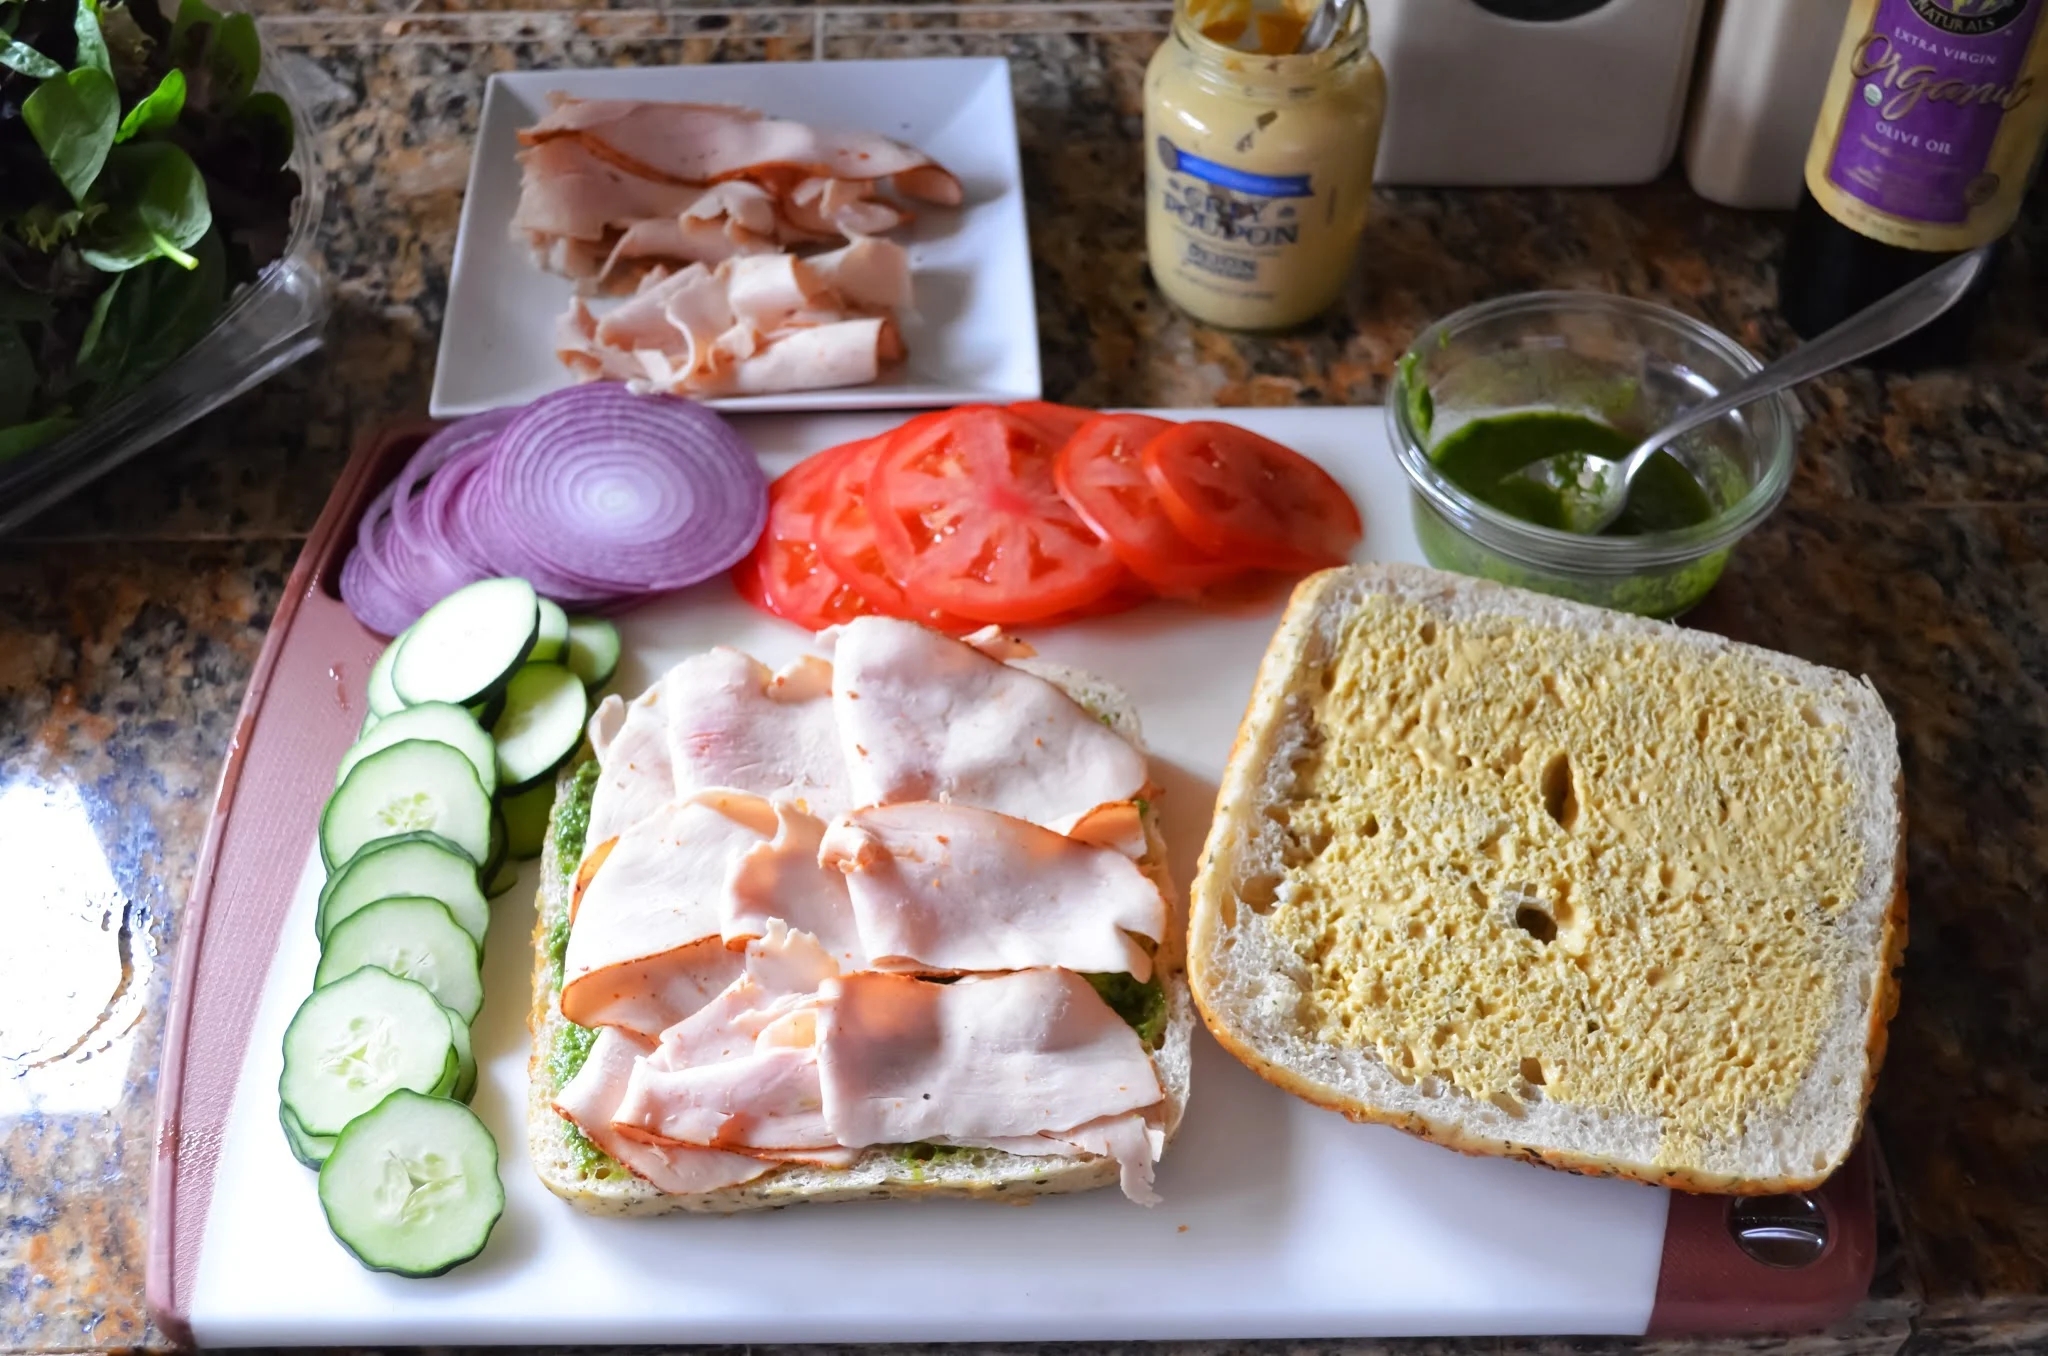 Turkey on top of pesto on focaccia bread with sliced cucumber, red onion and tomato on a white cutting board.